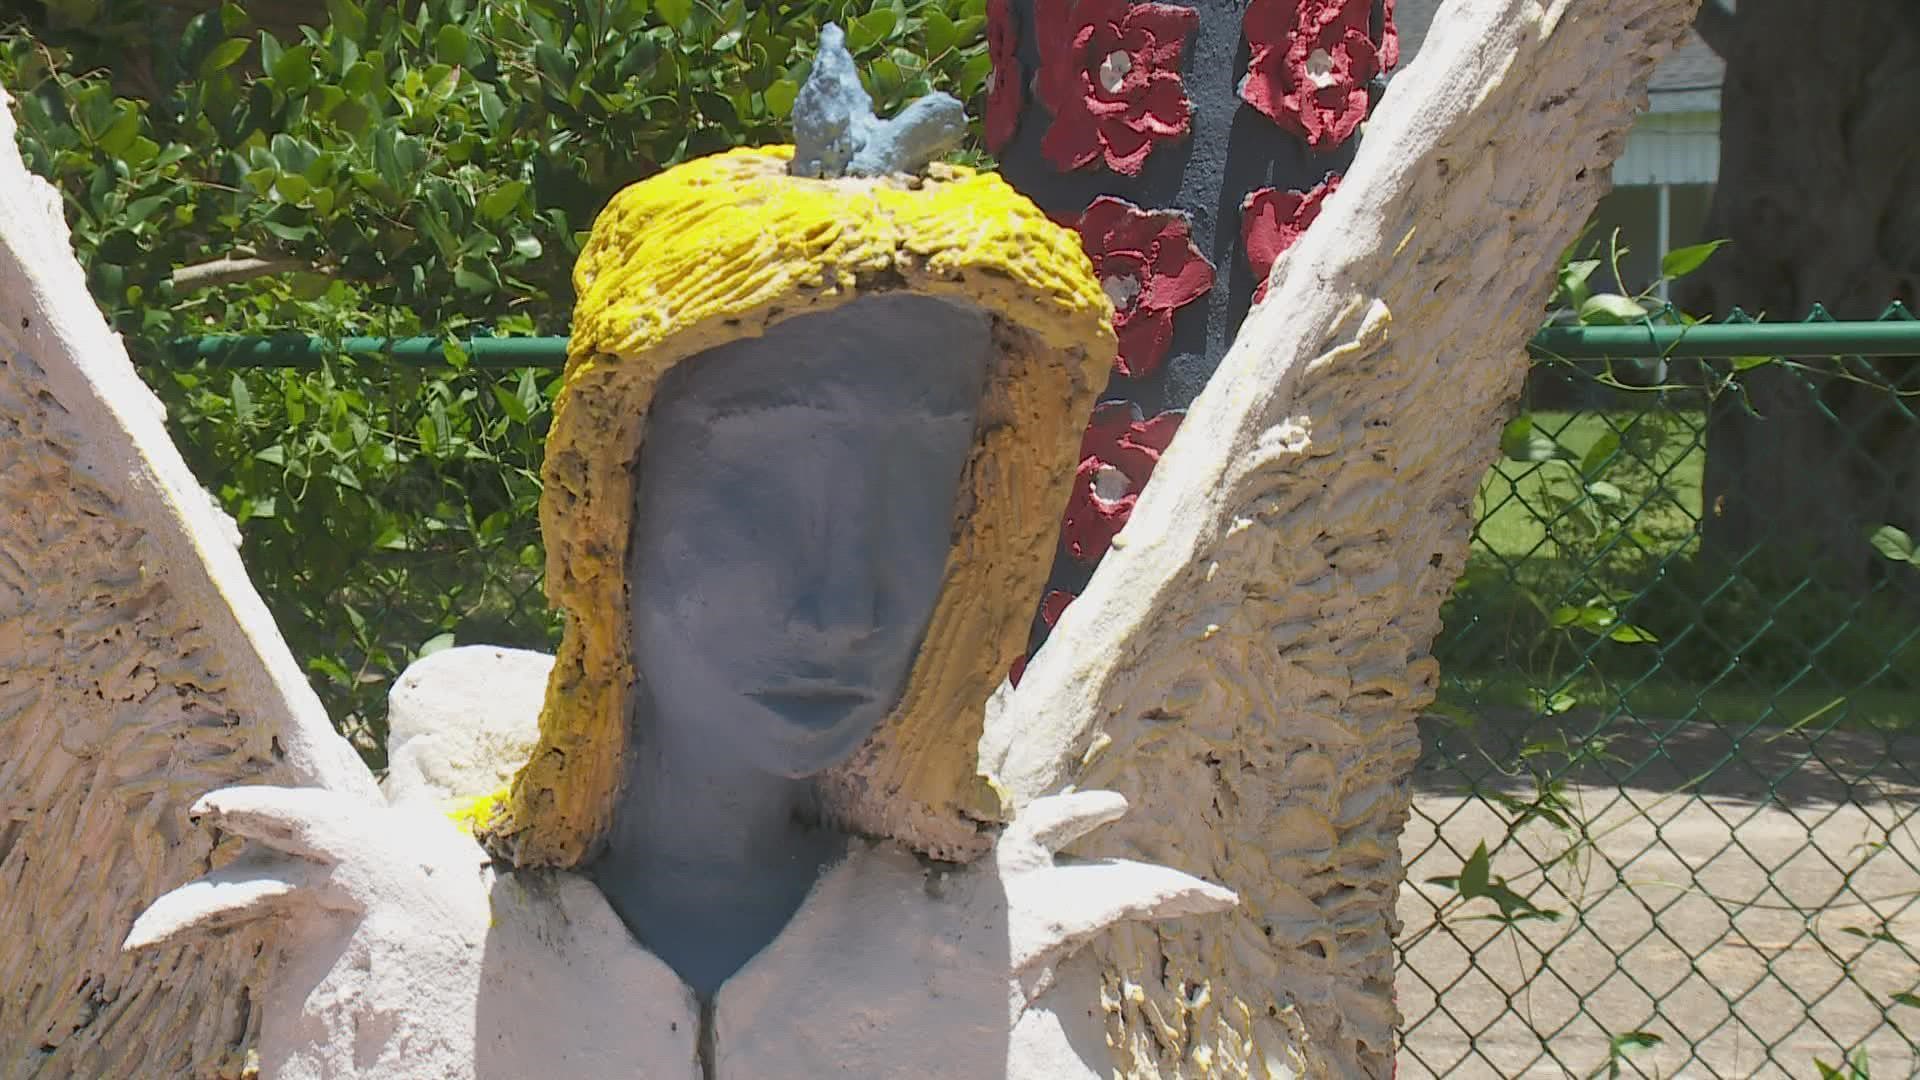 The tourist attraction saw three of its statues vandalized and an art piece stolen.